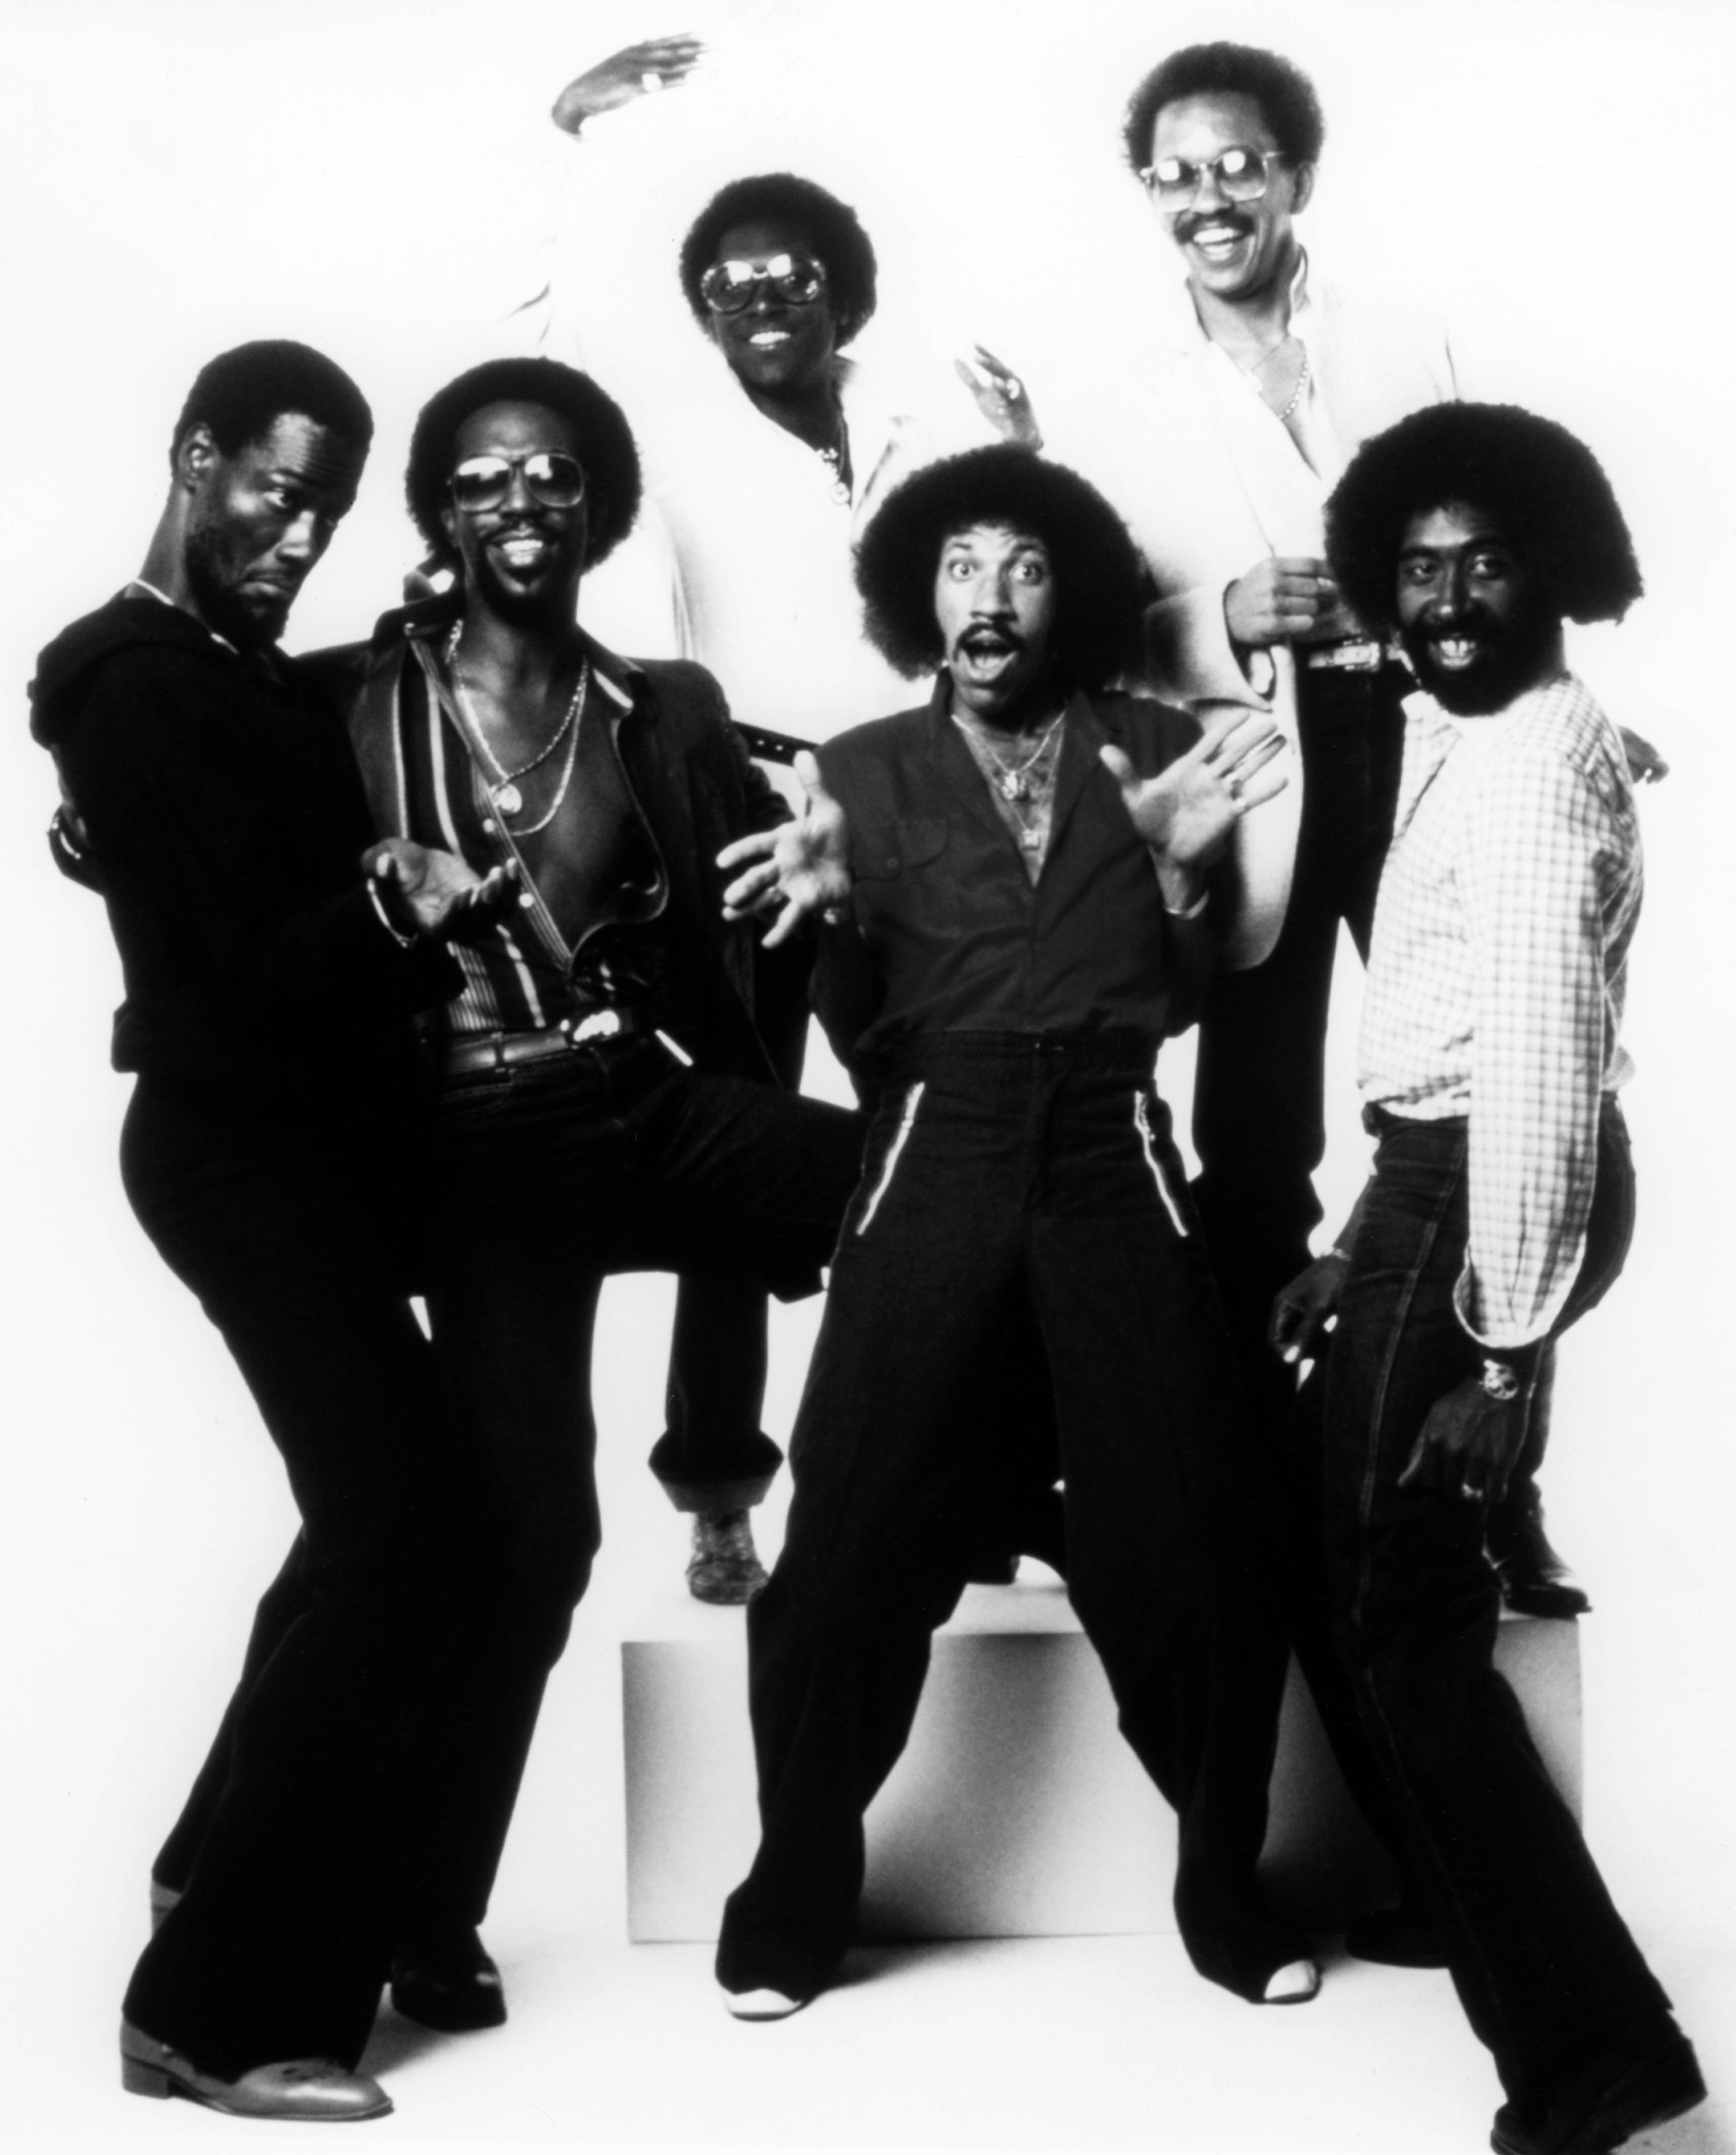 Lionel Richie, third from right, and Commodores in 1970. | Source: Getty Images